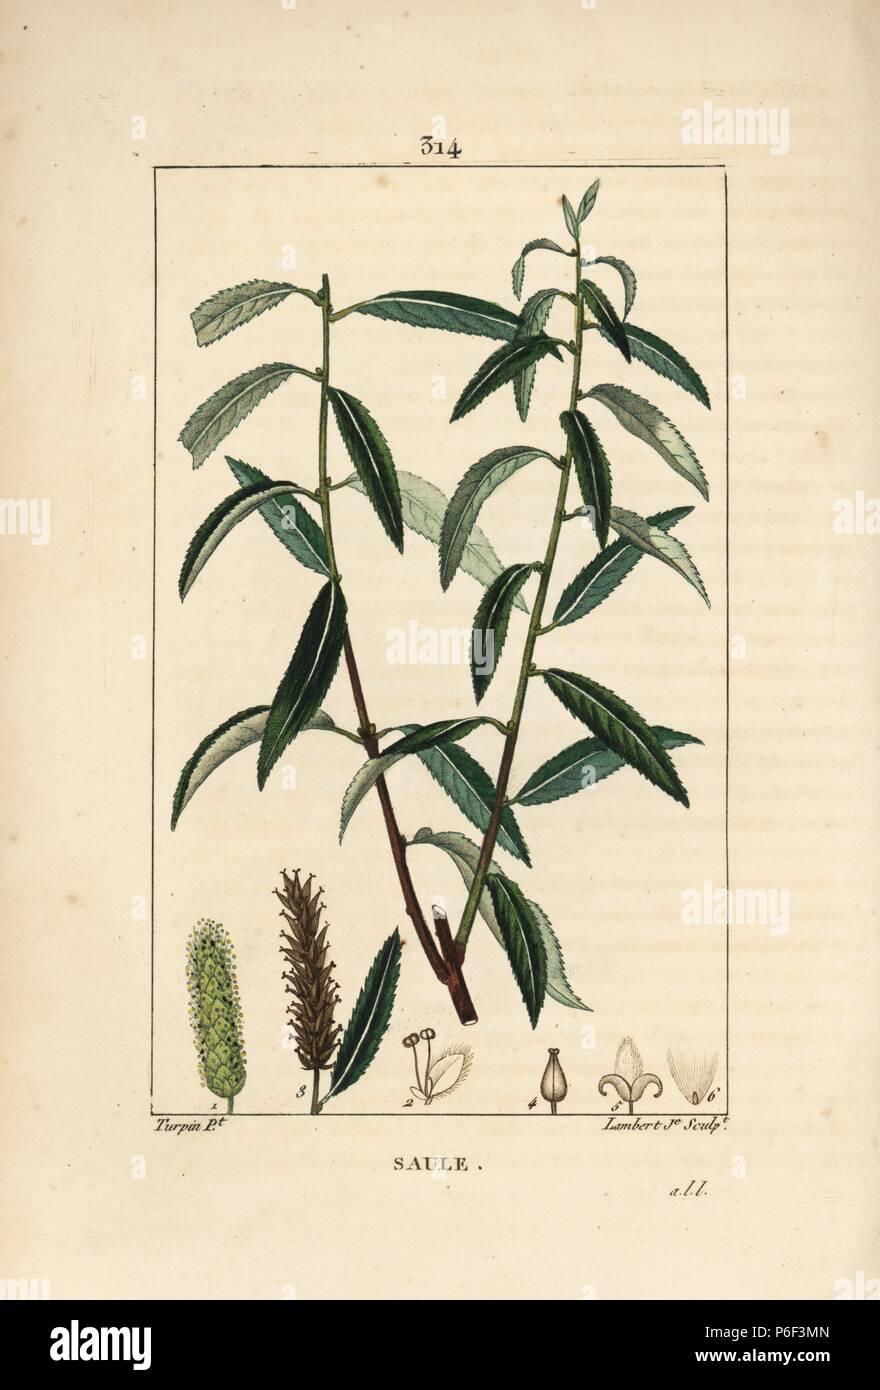 Antique Black Pussy Willow Engraving Vintage Print 19th Century Trees of North America Botanical French Engraving